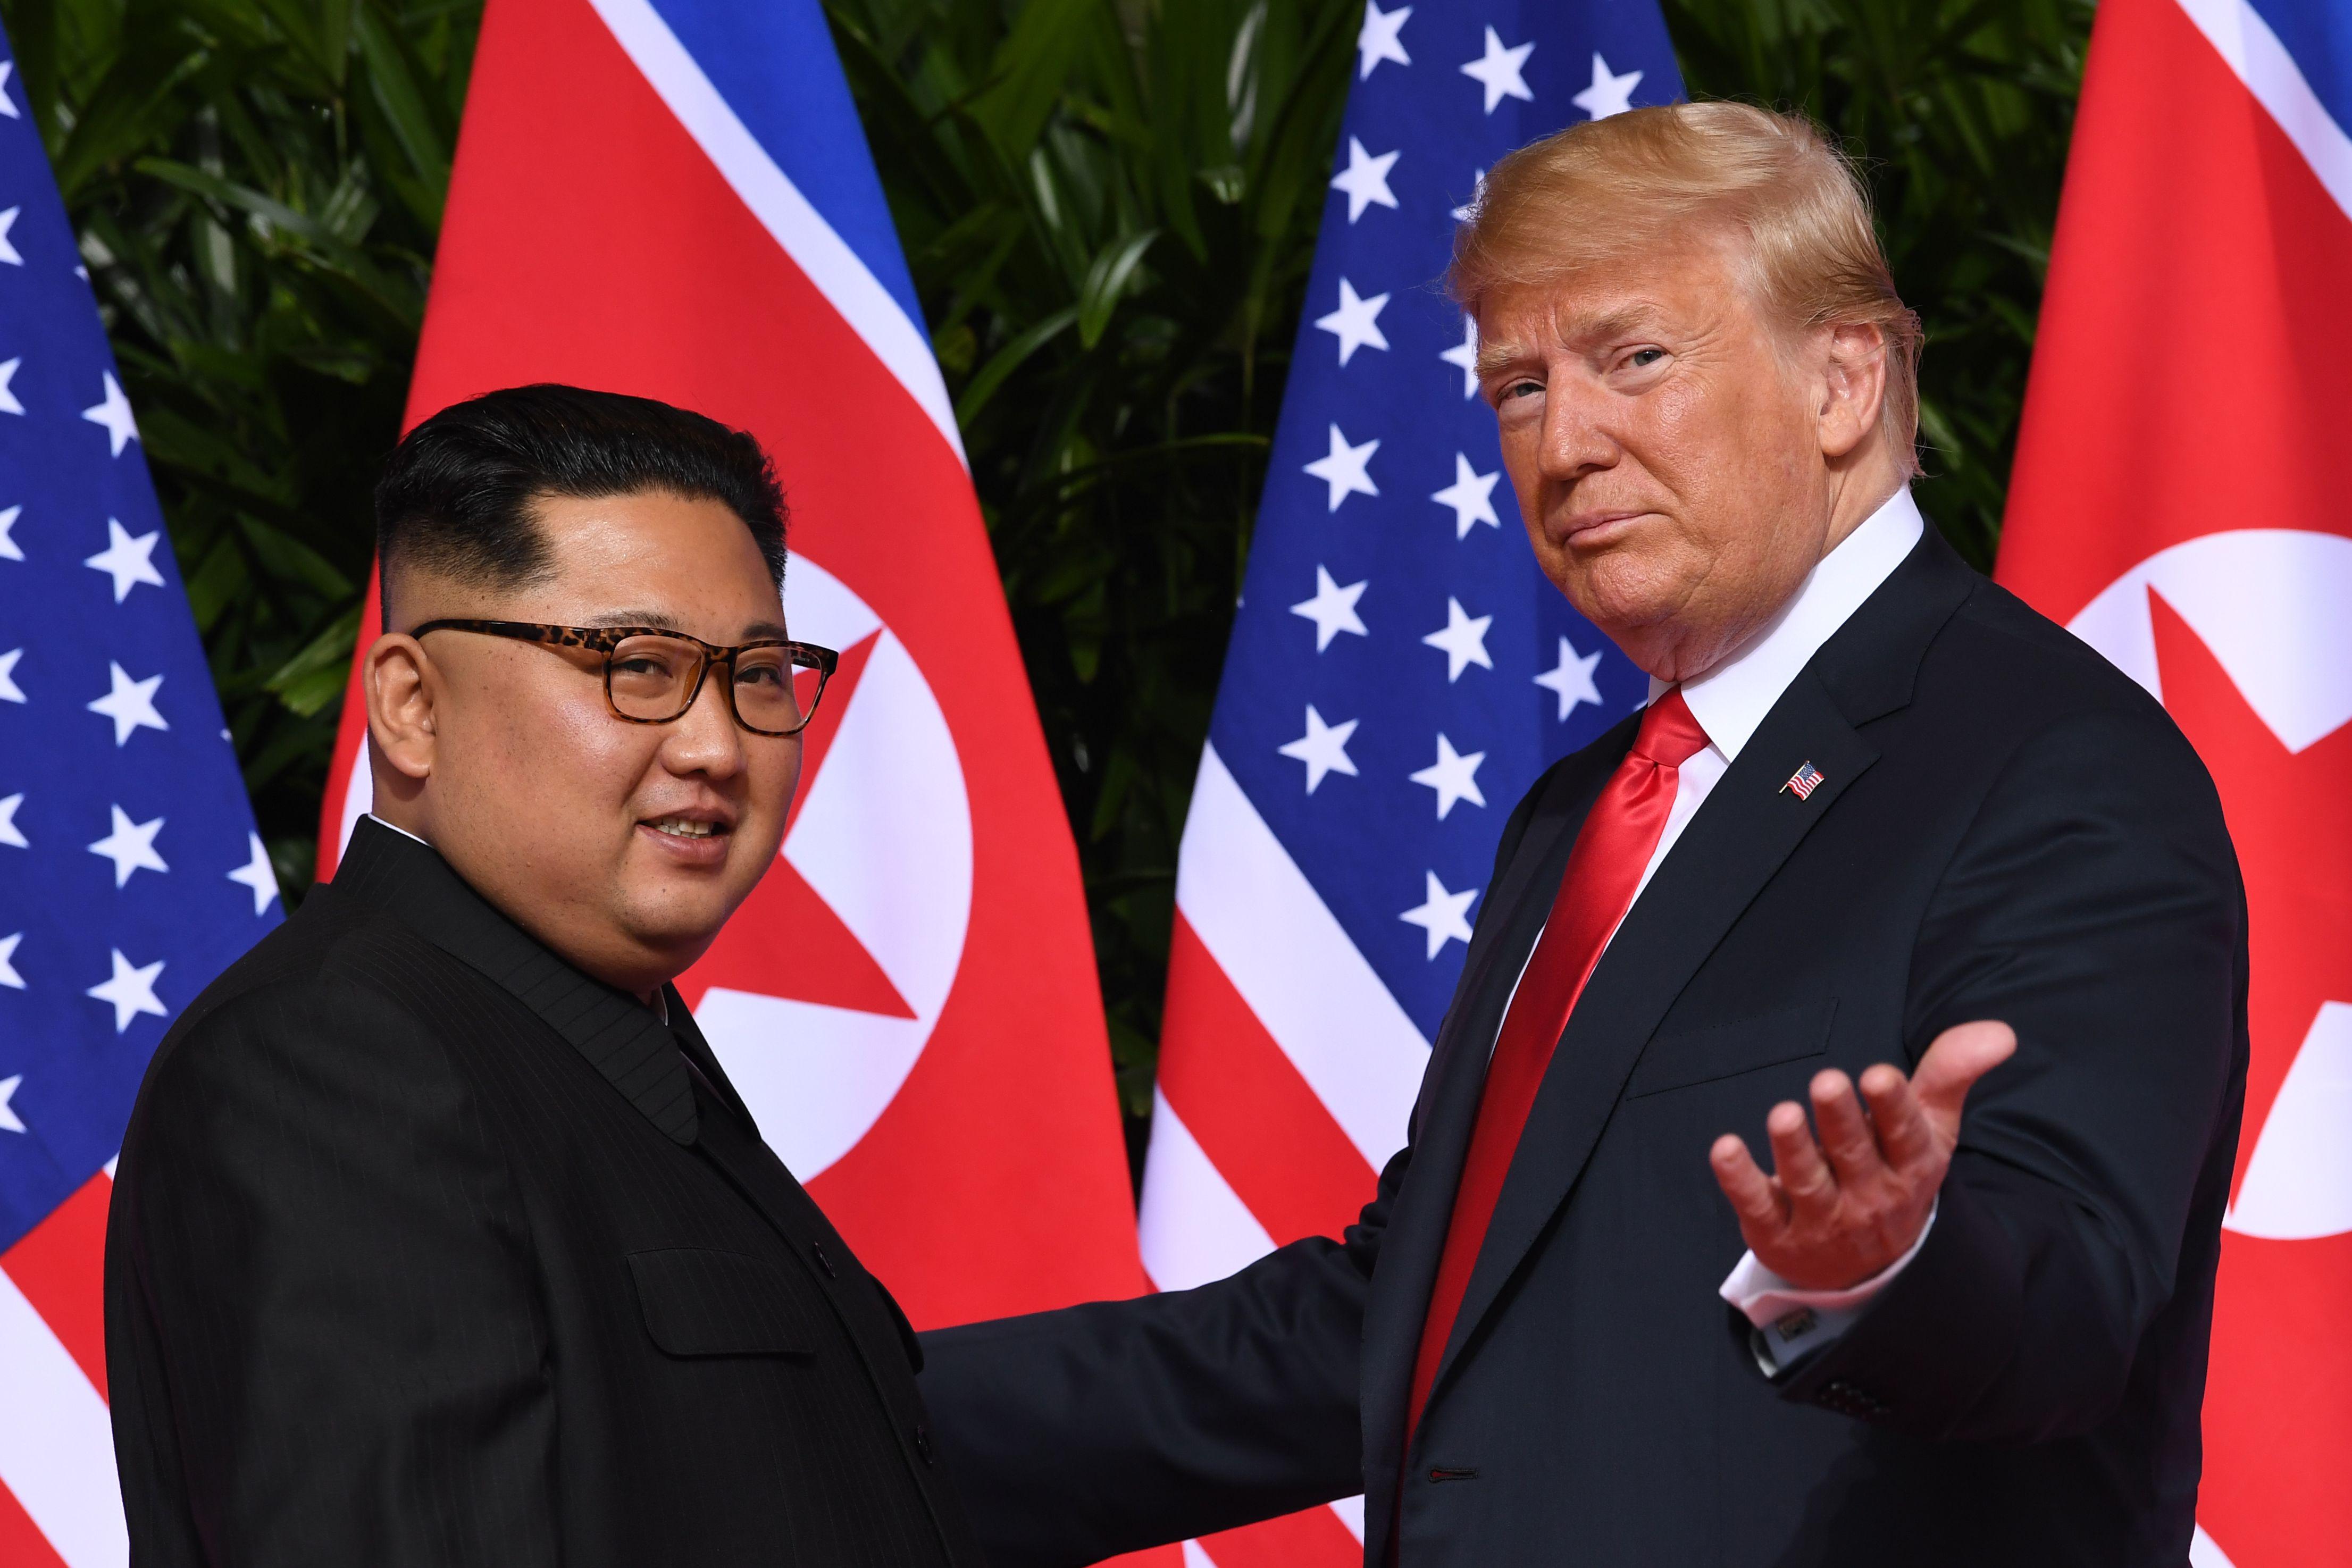 President Donald Trump gestures as he meets with North Korea's leader Kim Jong Un at the start of their historic US-North Korea summit, at the Capella Hotel on Sentosa island in Singapore on June 12, 2018. 